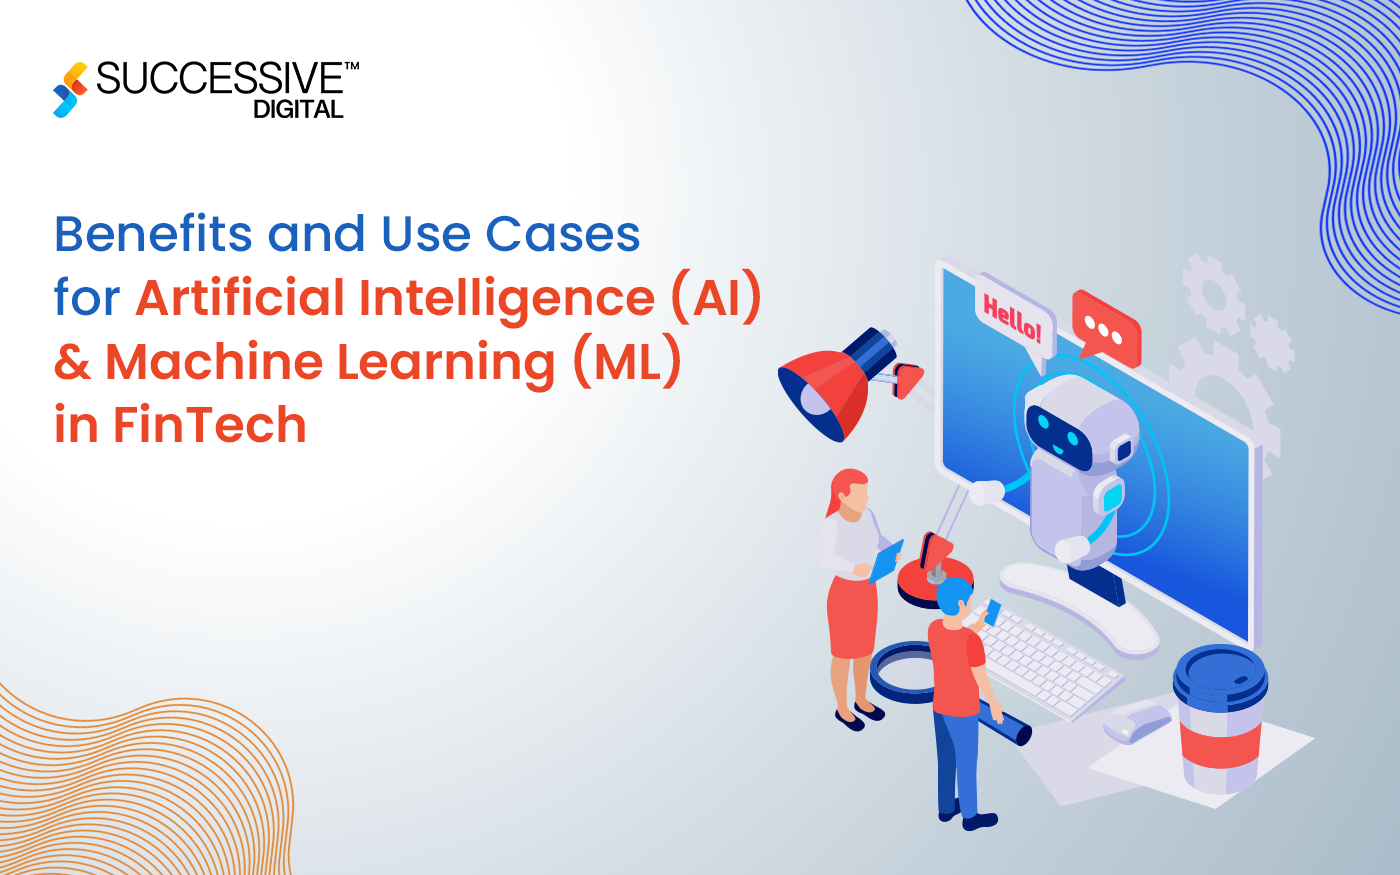 Benefits and Use Cases for Artificial Intelligence (AI) and Machine Learning (ML) in FinTech